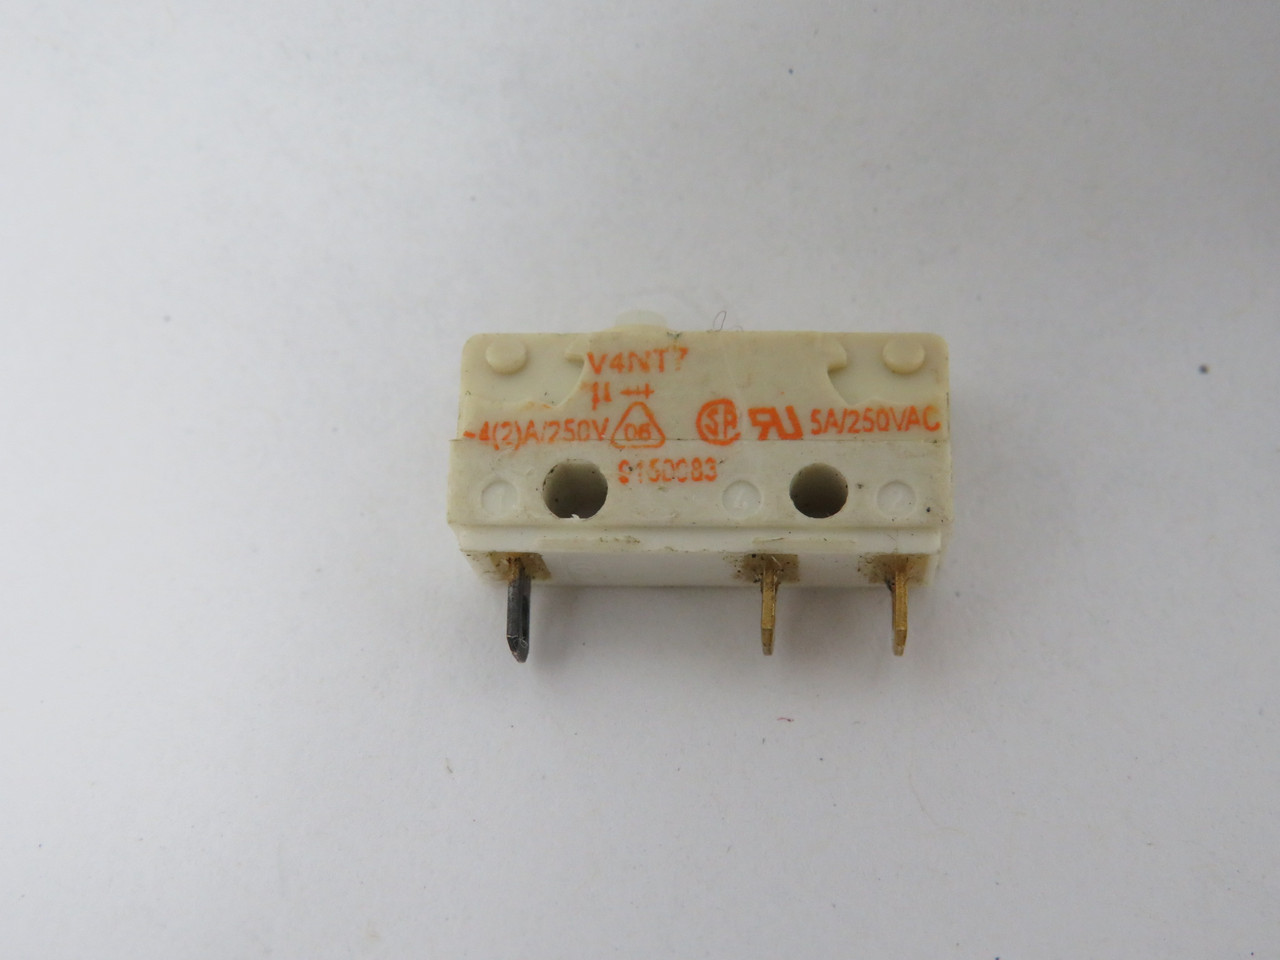 Burgess V4NT7 Mini Snap Action Limit Switch 4(2)A@250V 5A@250VAC USED